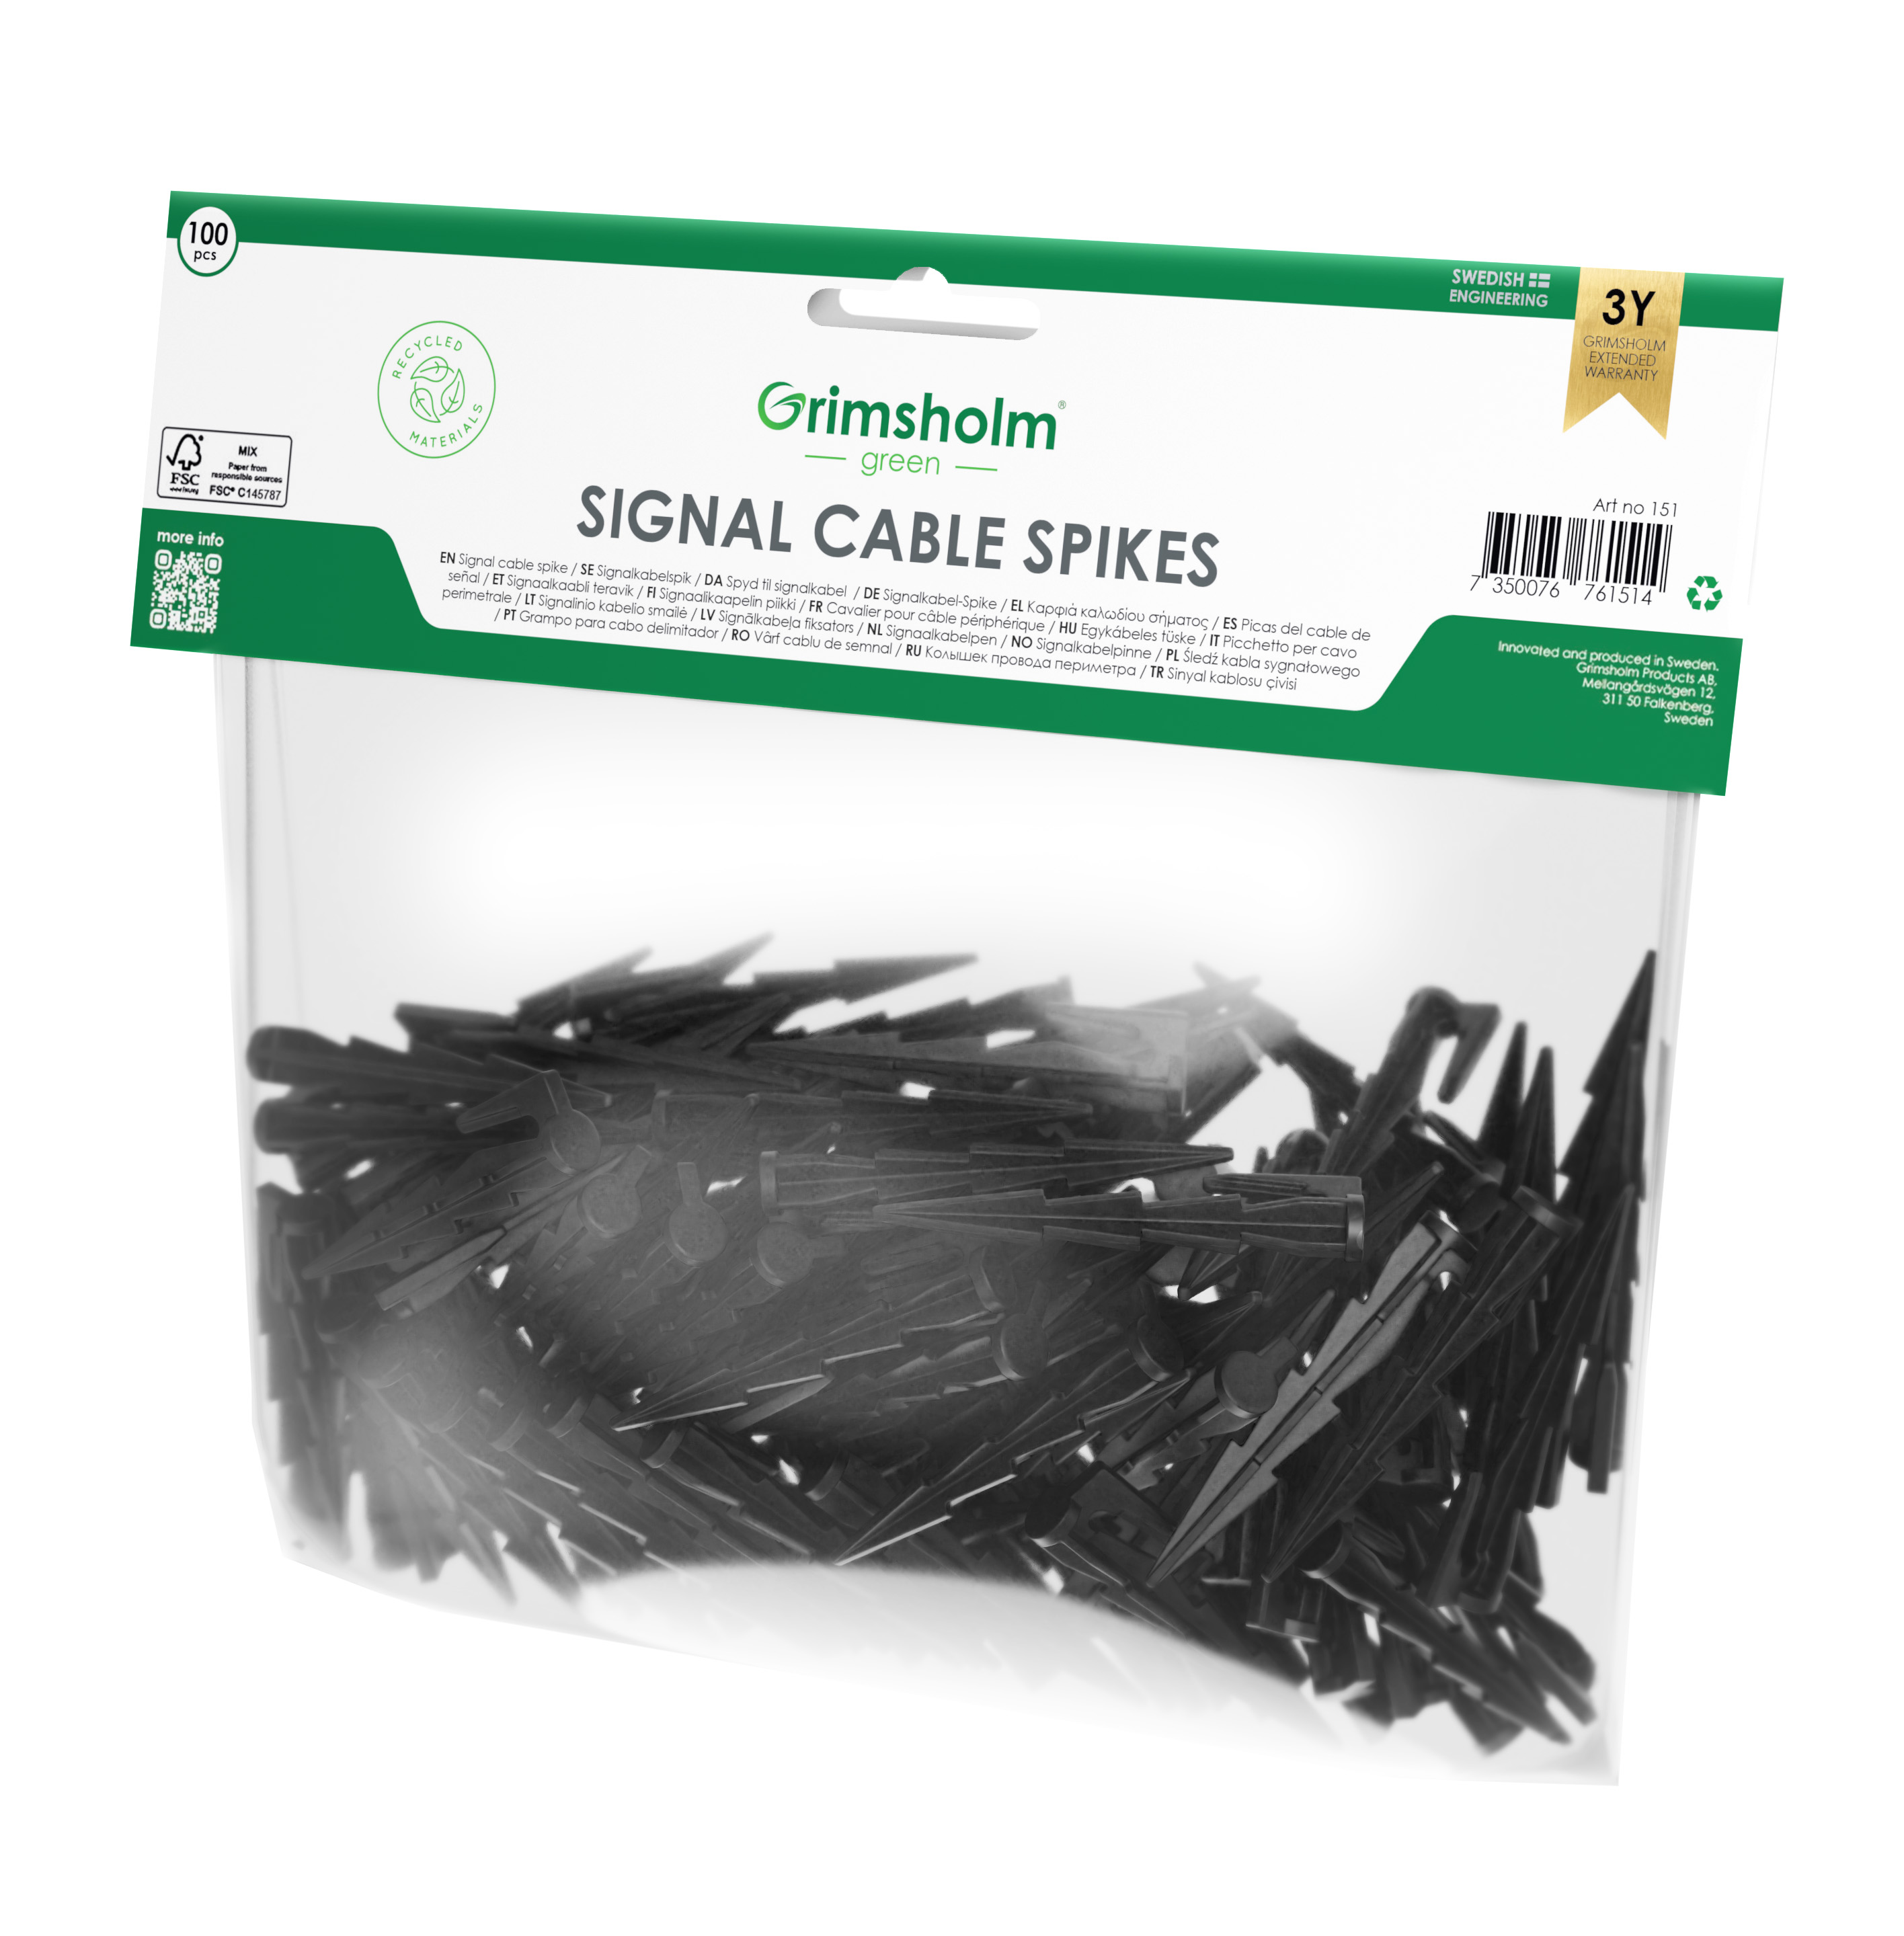 Signal cable spikes, 100 pcs - Click Image to Close